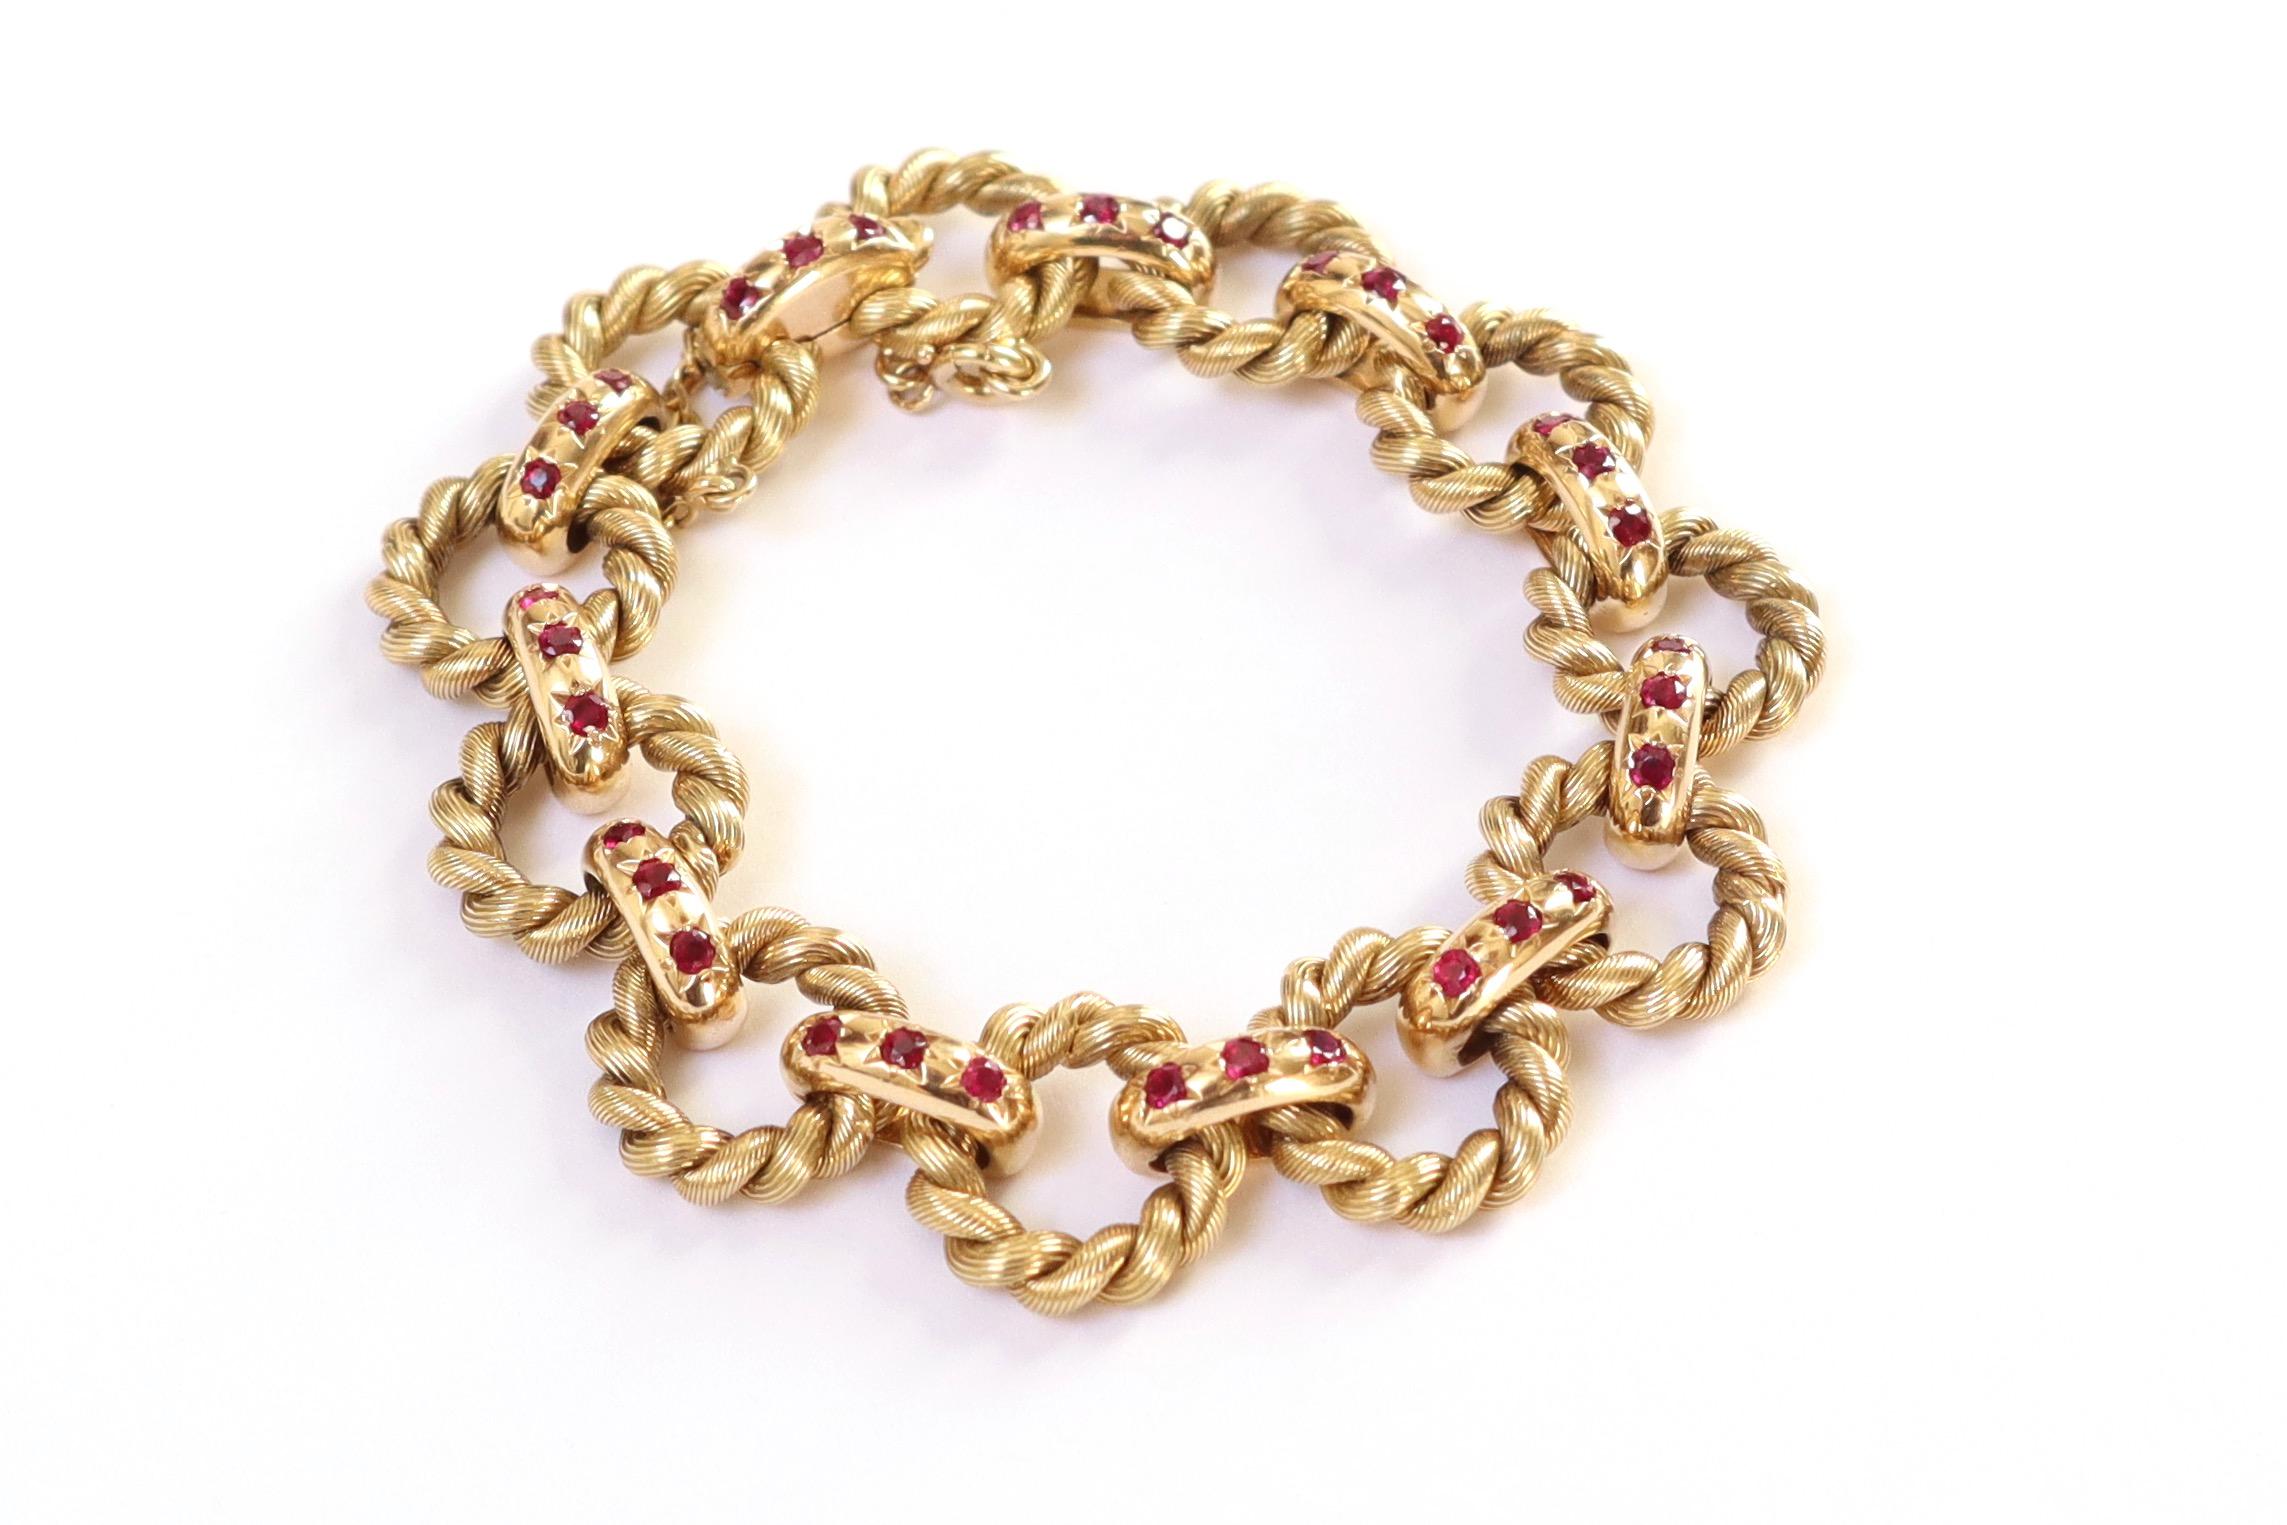 Brilliant Cut Van Cleef & Arpels Bracelet in 18K Yellow Gold and Rubies with Twisted Hoops For Sale